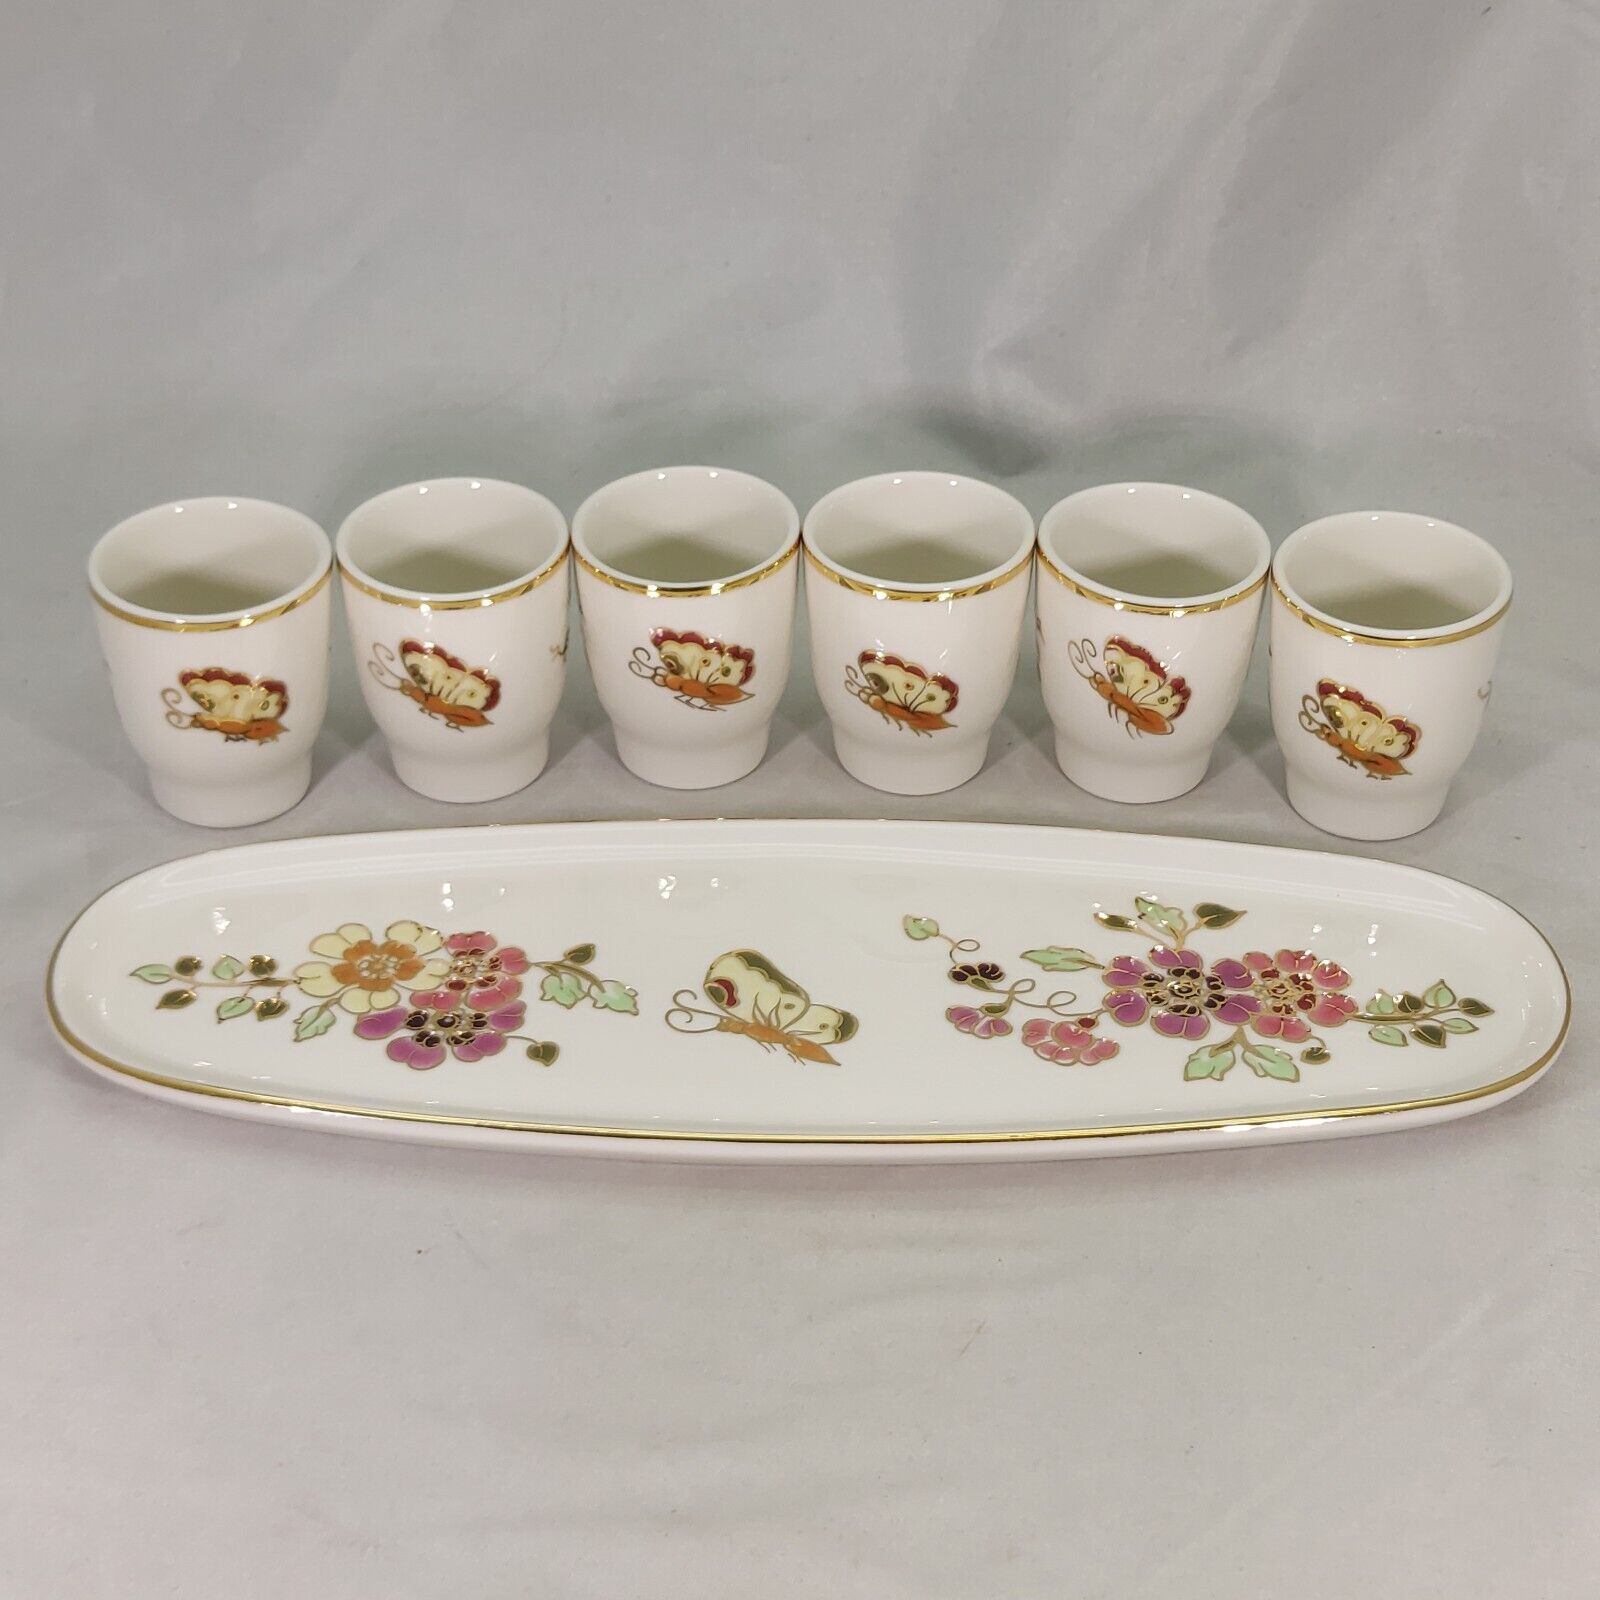 Zsolnay Hungary Pecs Hand Painted Shot / Egg Cups Set of 6 with Tray